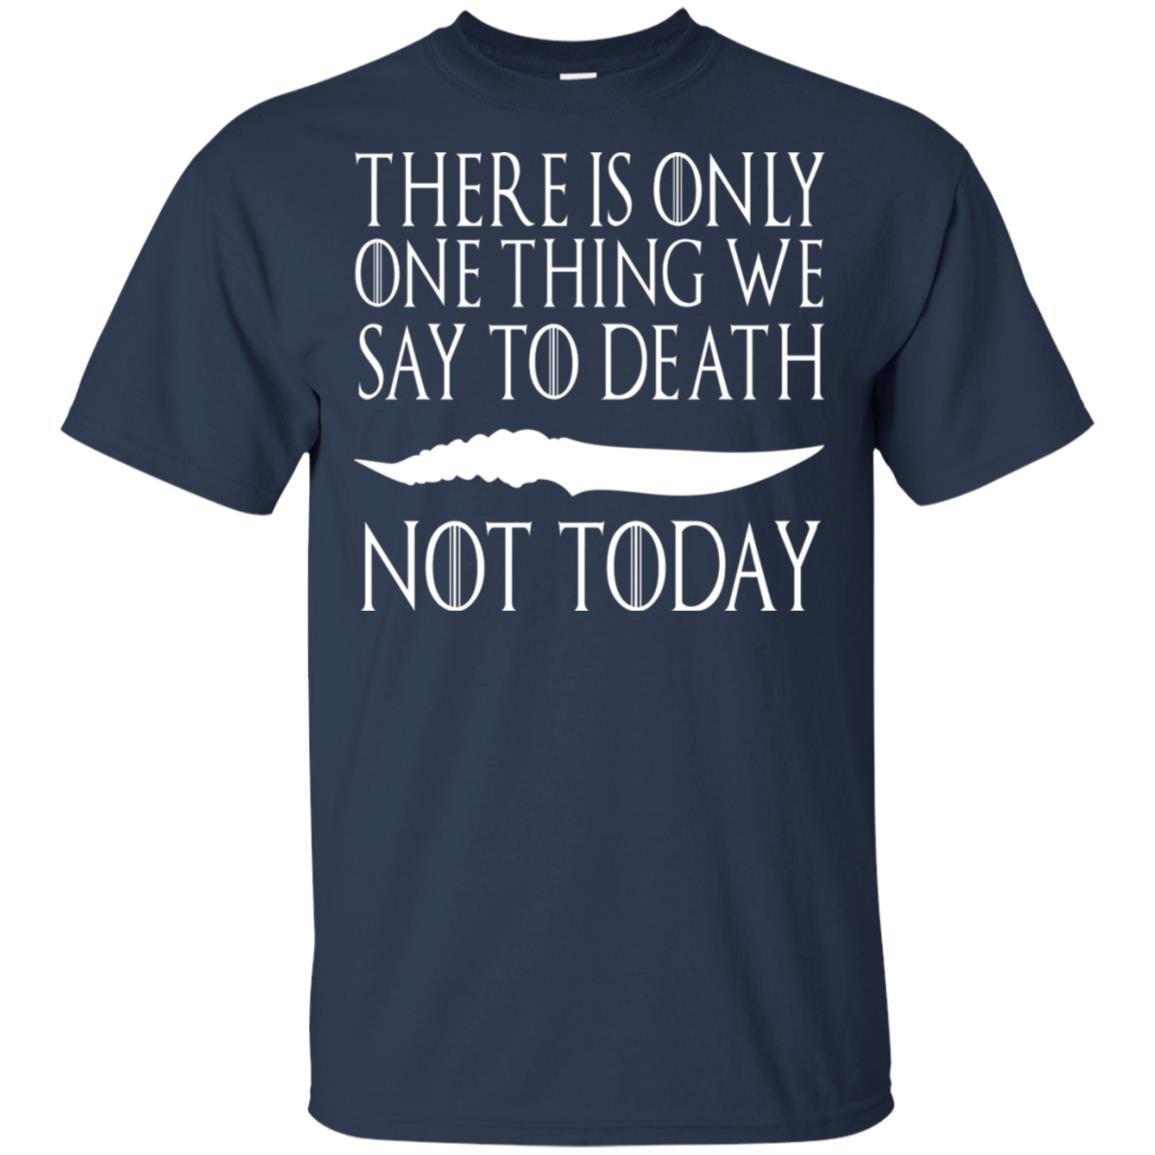 There Is Only One Thing We Say To Death - Not Today Shirt